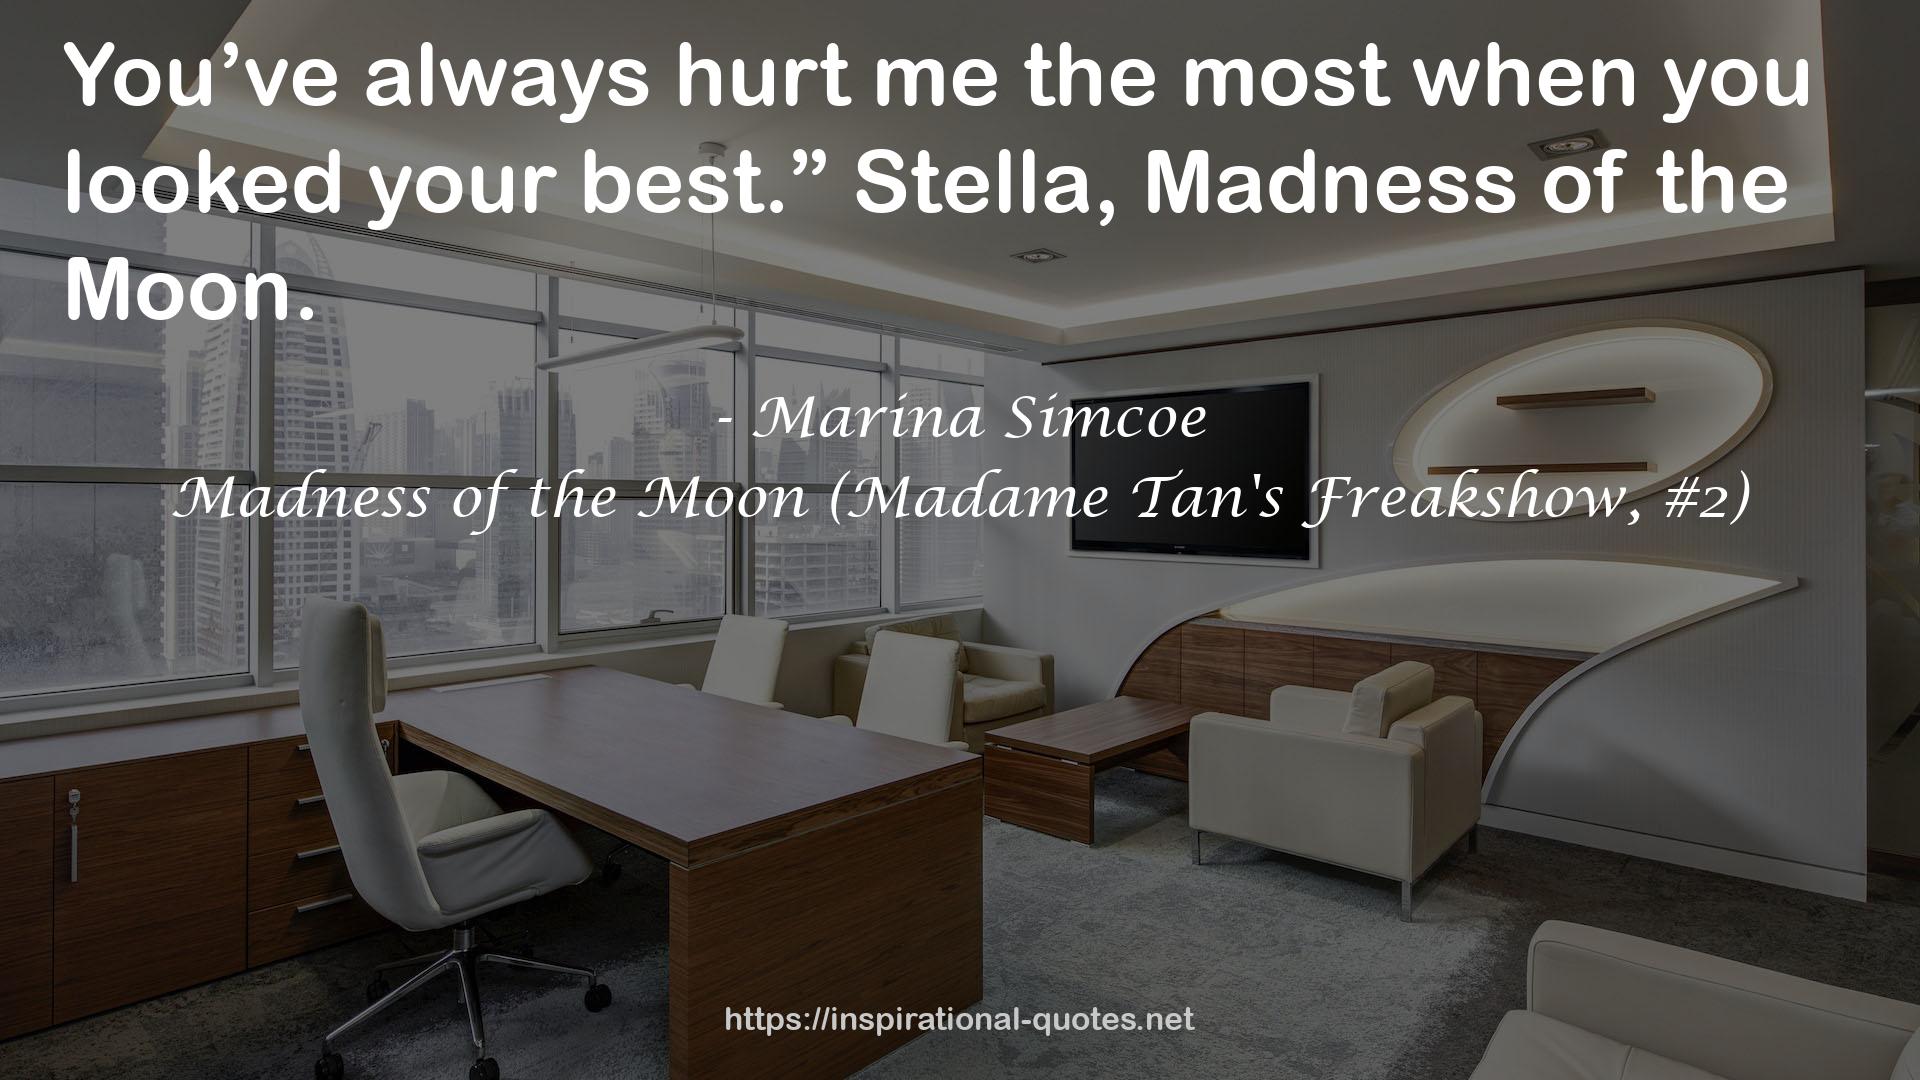 Madness of the Moon (Madame Tan's Freakshow, #2) QUOTES